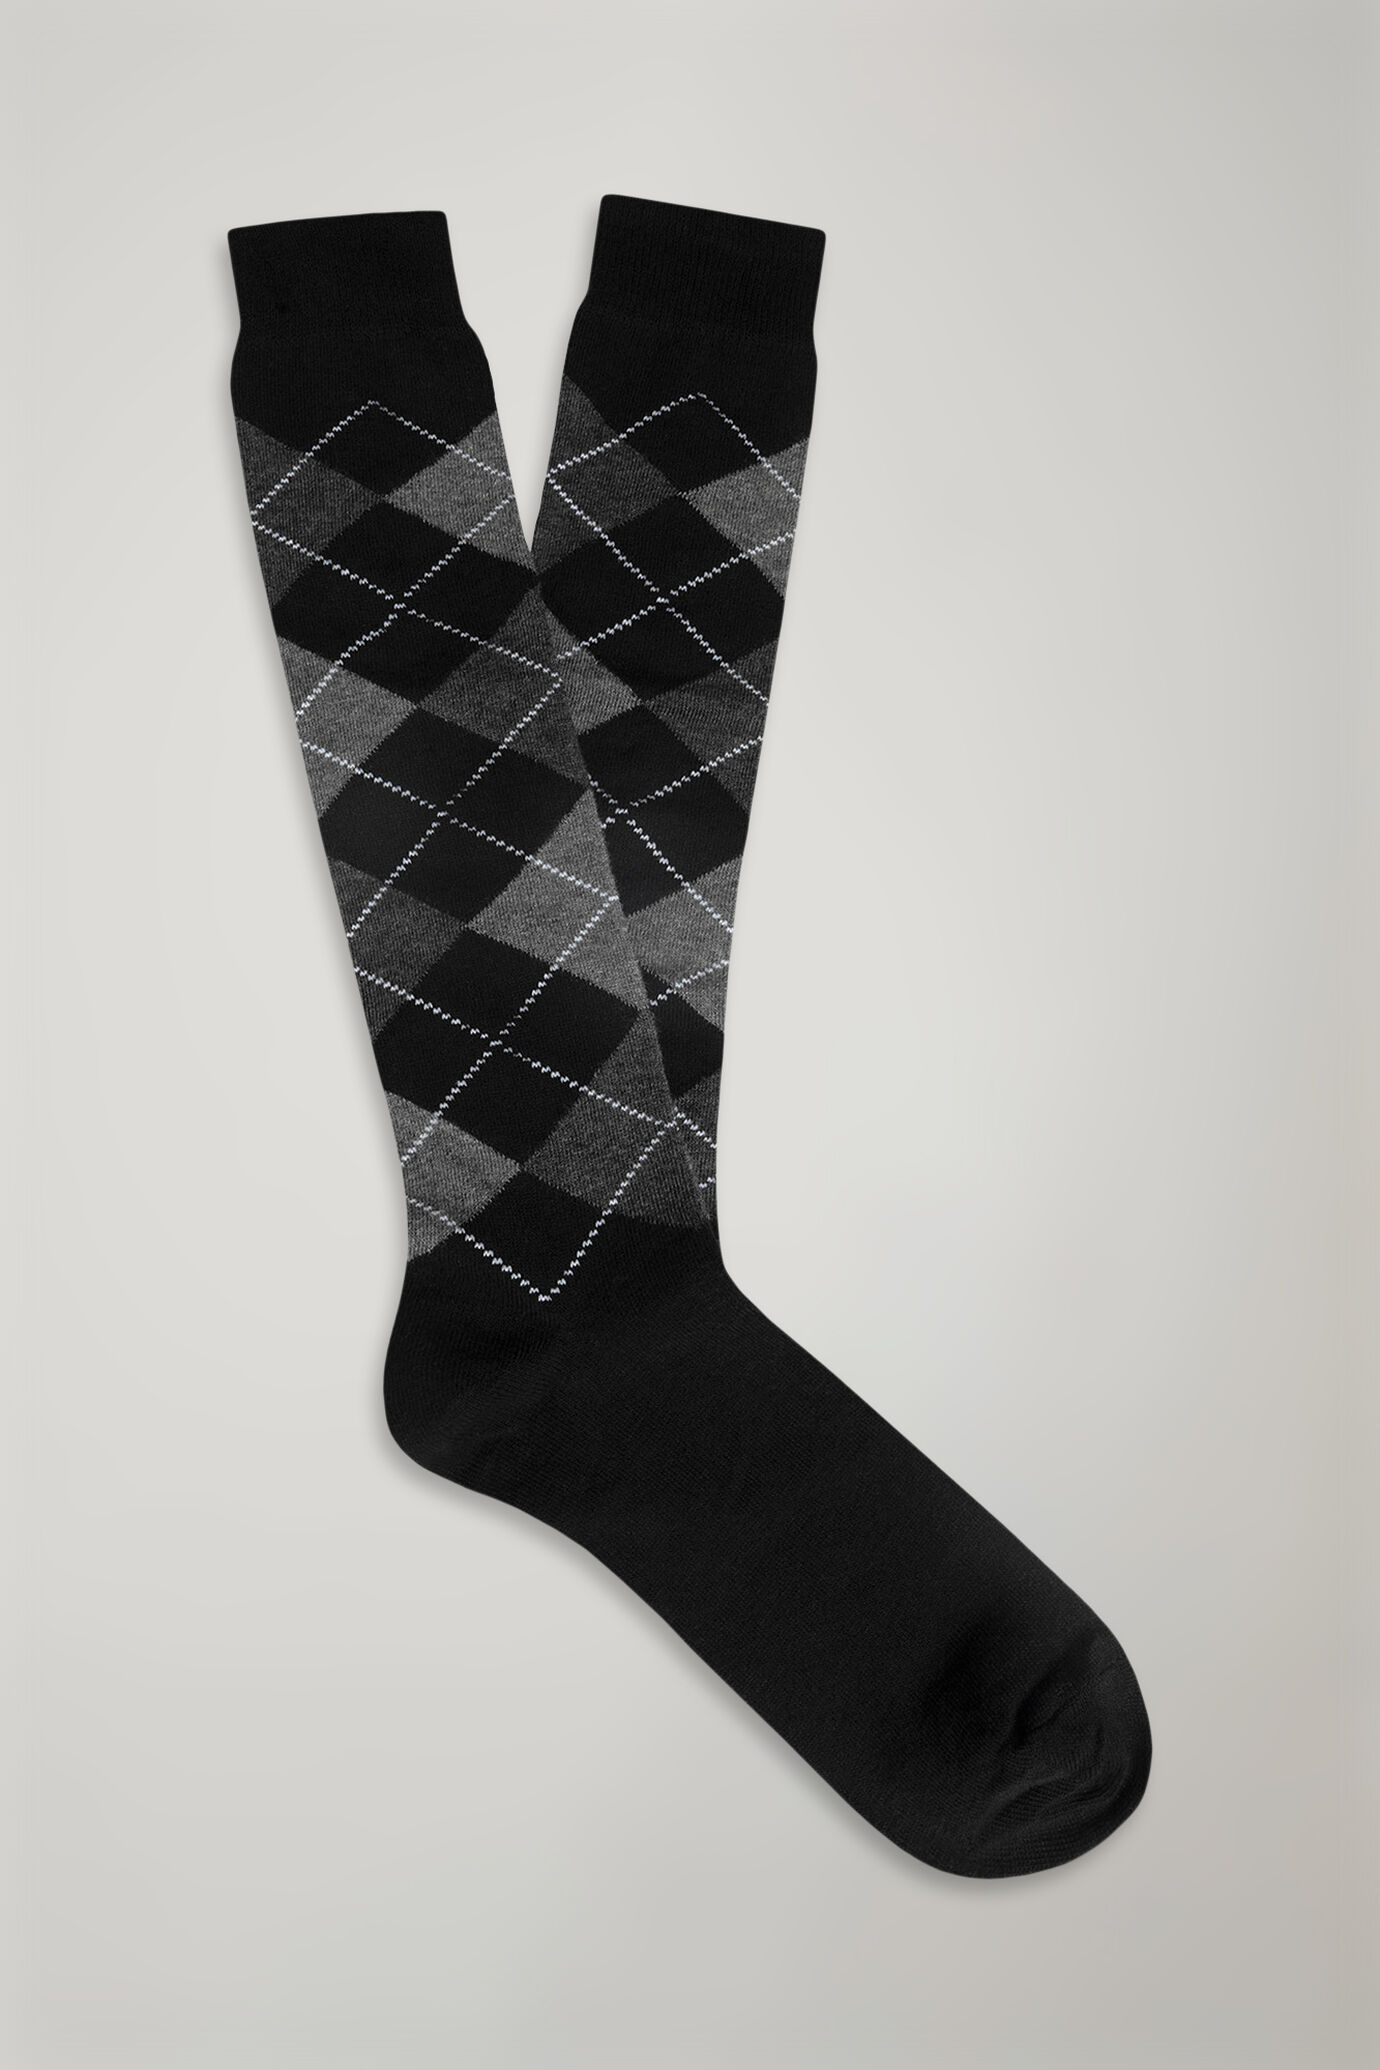 Men's knitted long socks with rhombuses pattern made in Italy image number 0